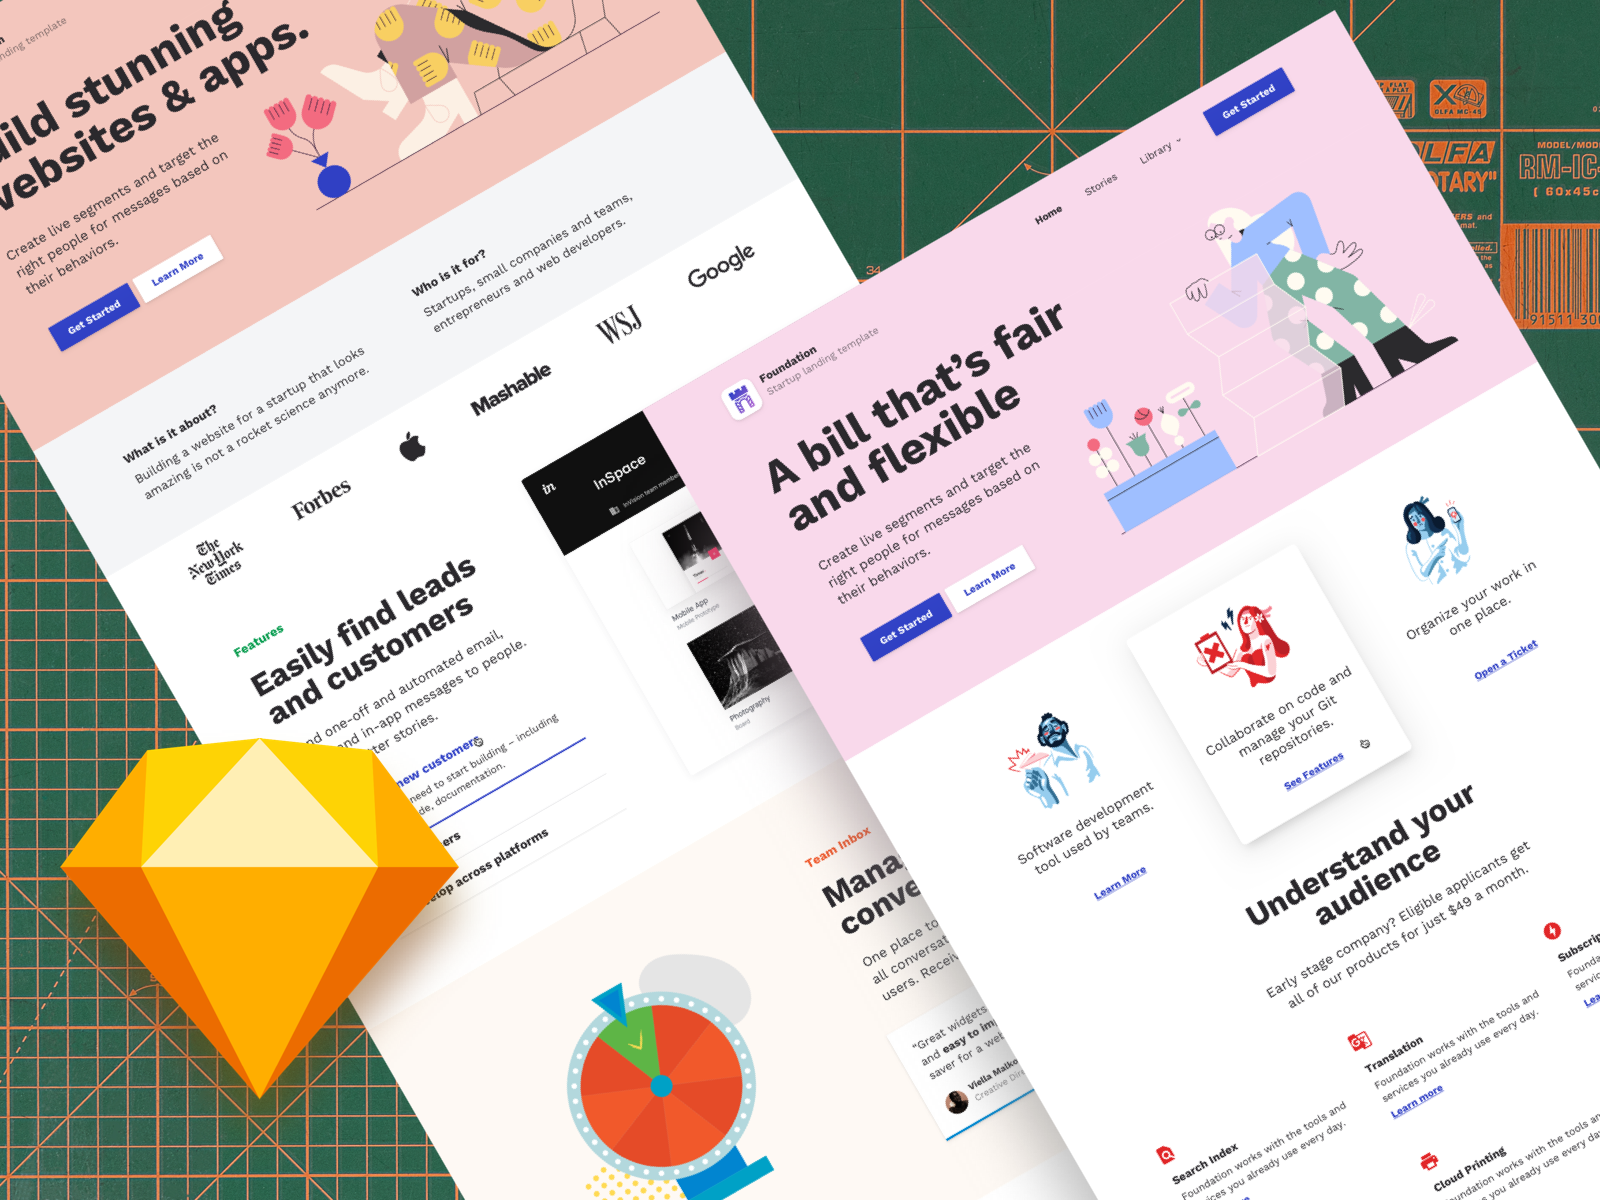 18+ Sketch UI Kits and Sketch App Resources for Designers | Envato Tuts+